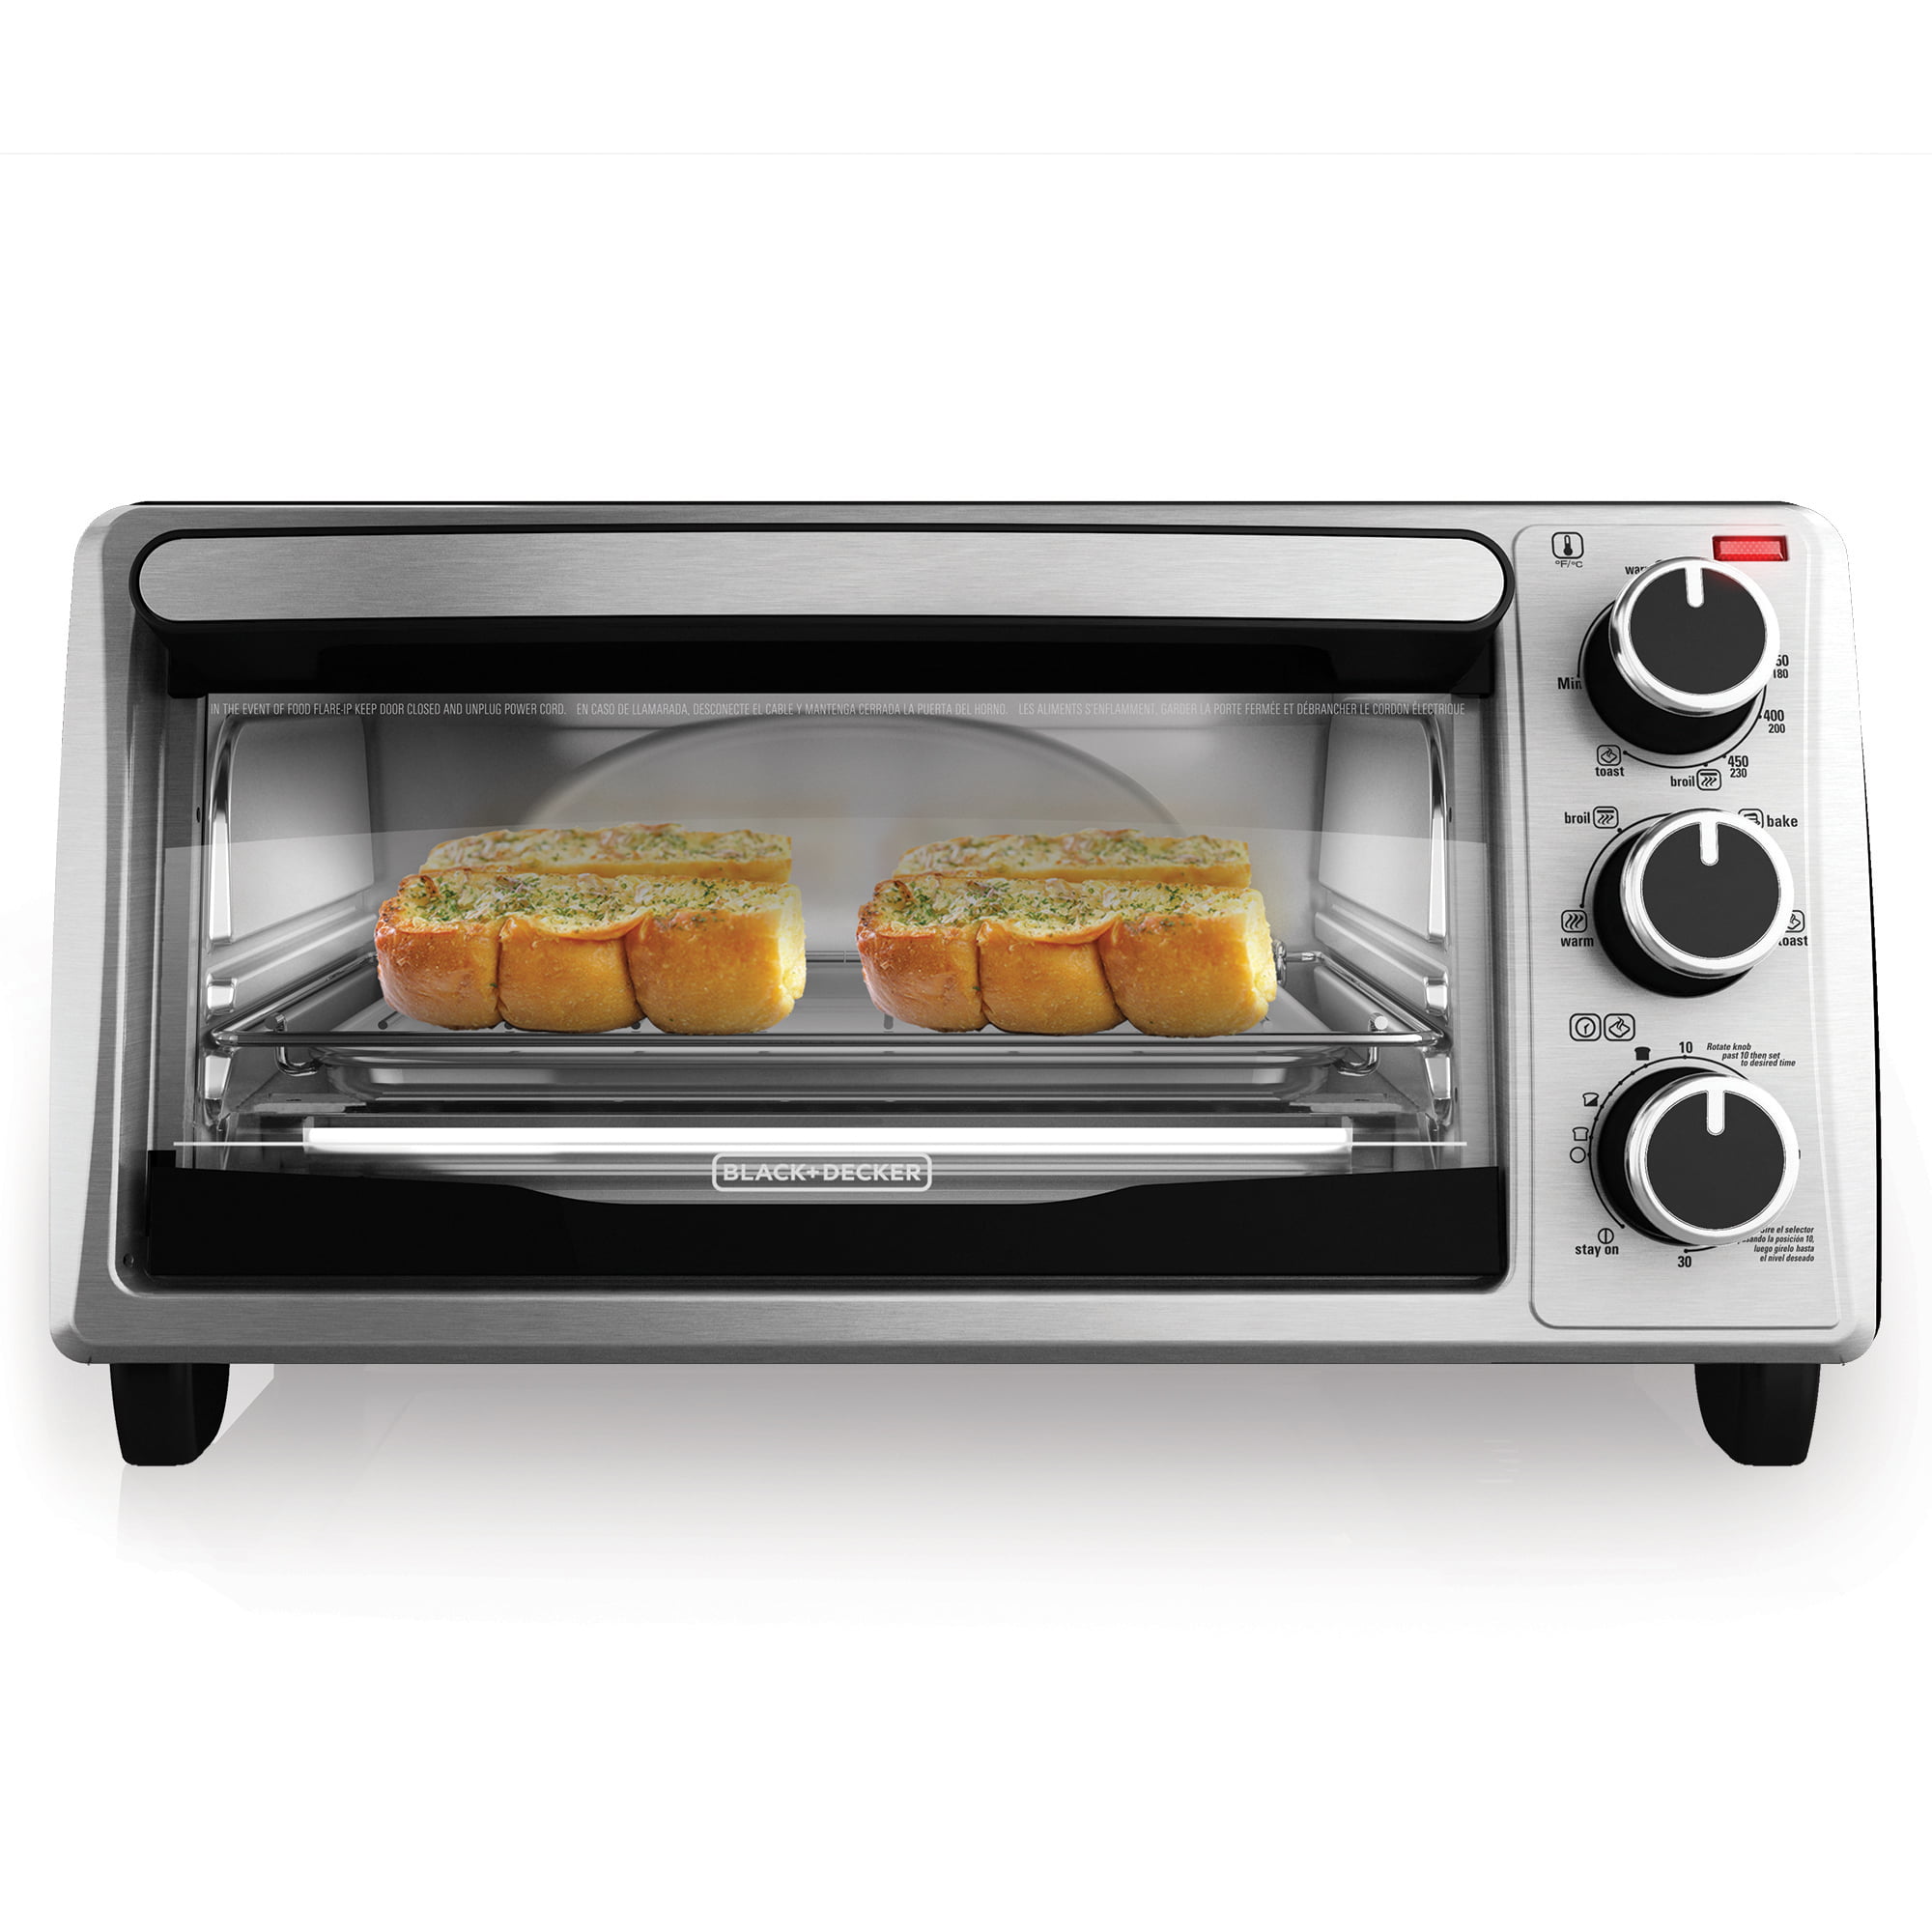 Black + Decker Oven Toaster Grill (OTG) 19 Litres With Rotisserie And  Convection Feature For Grilling And Baking - Grey - Velan Store